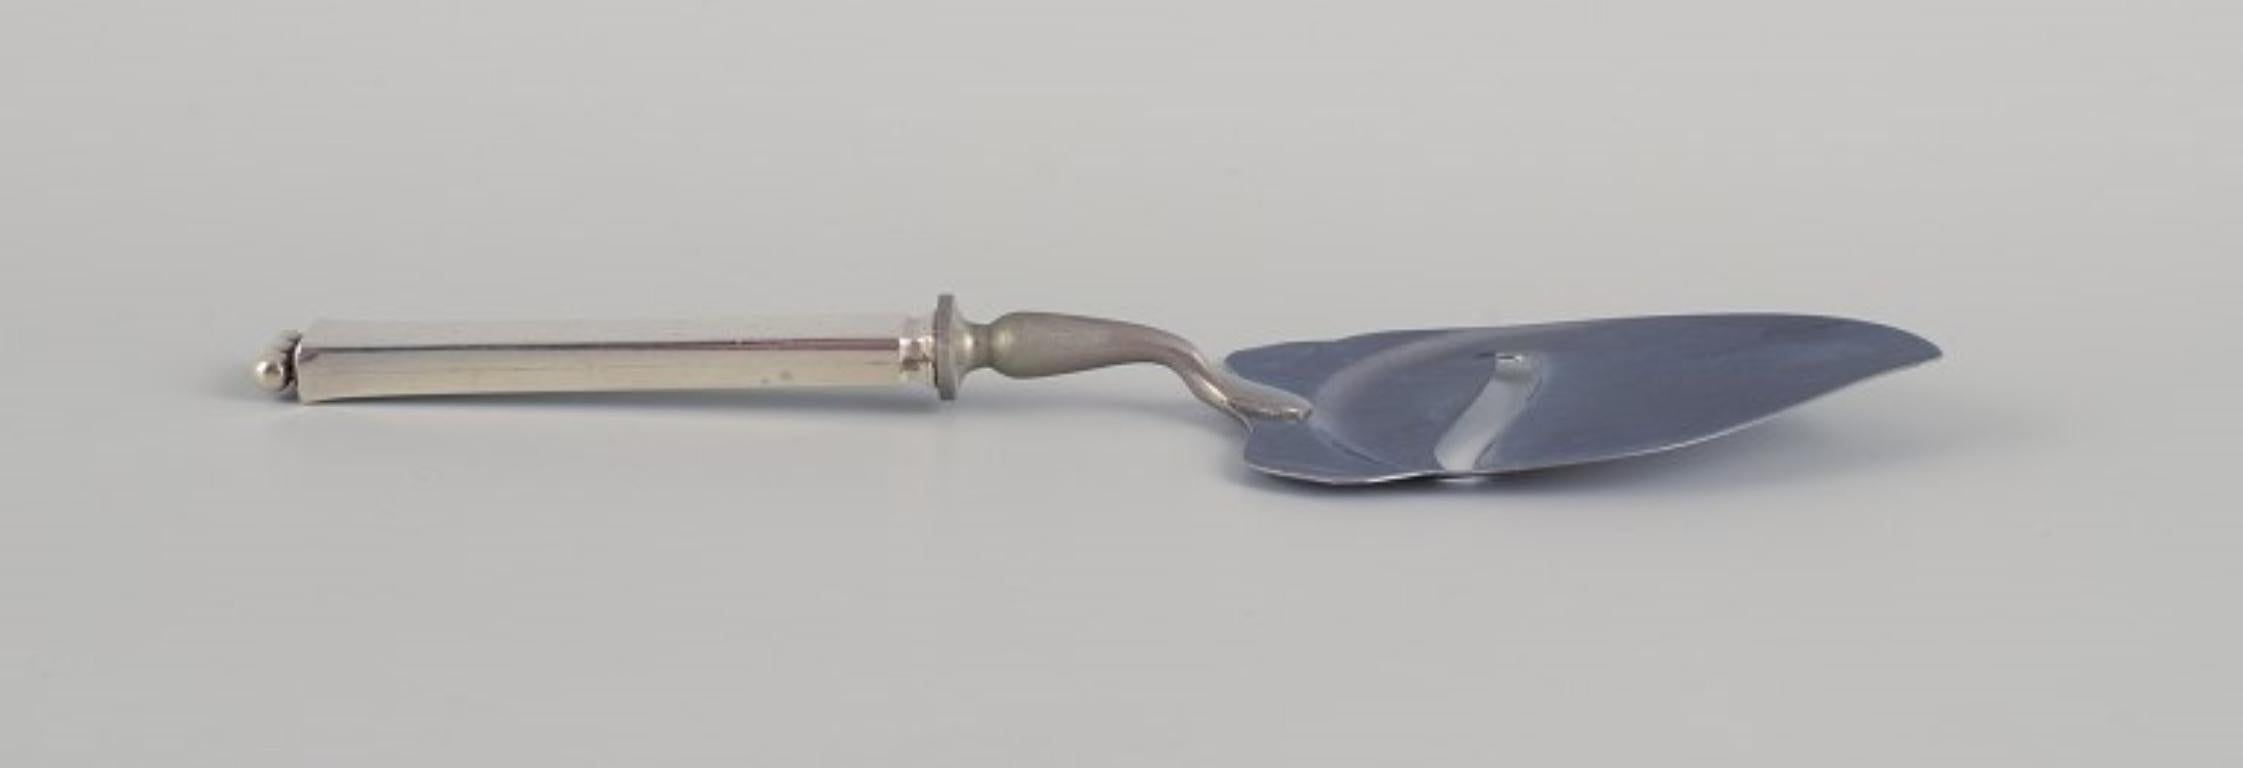 Evald Nielsen, Denmark, Art Deco cheese slicer in silver and stainless steel.
Approx. 1930.
Model number 27.
Marked.
In excellent condition.
Dimensions: L 20.5 x D 7.0 cm.